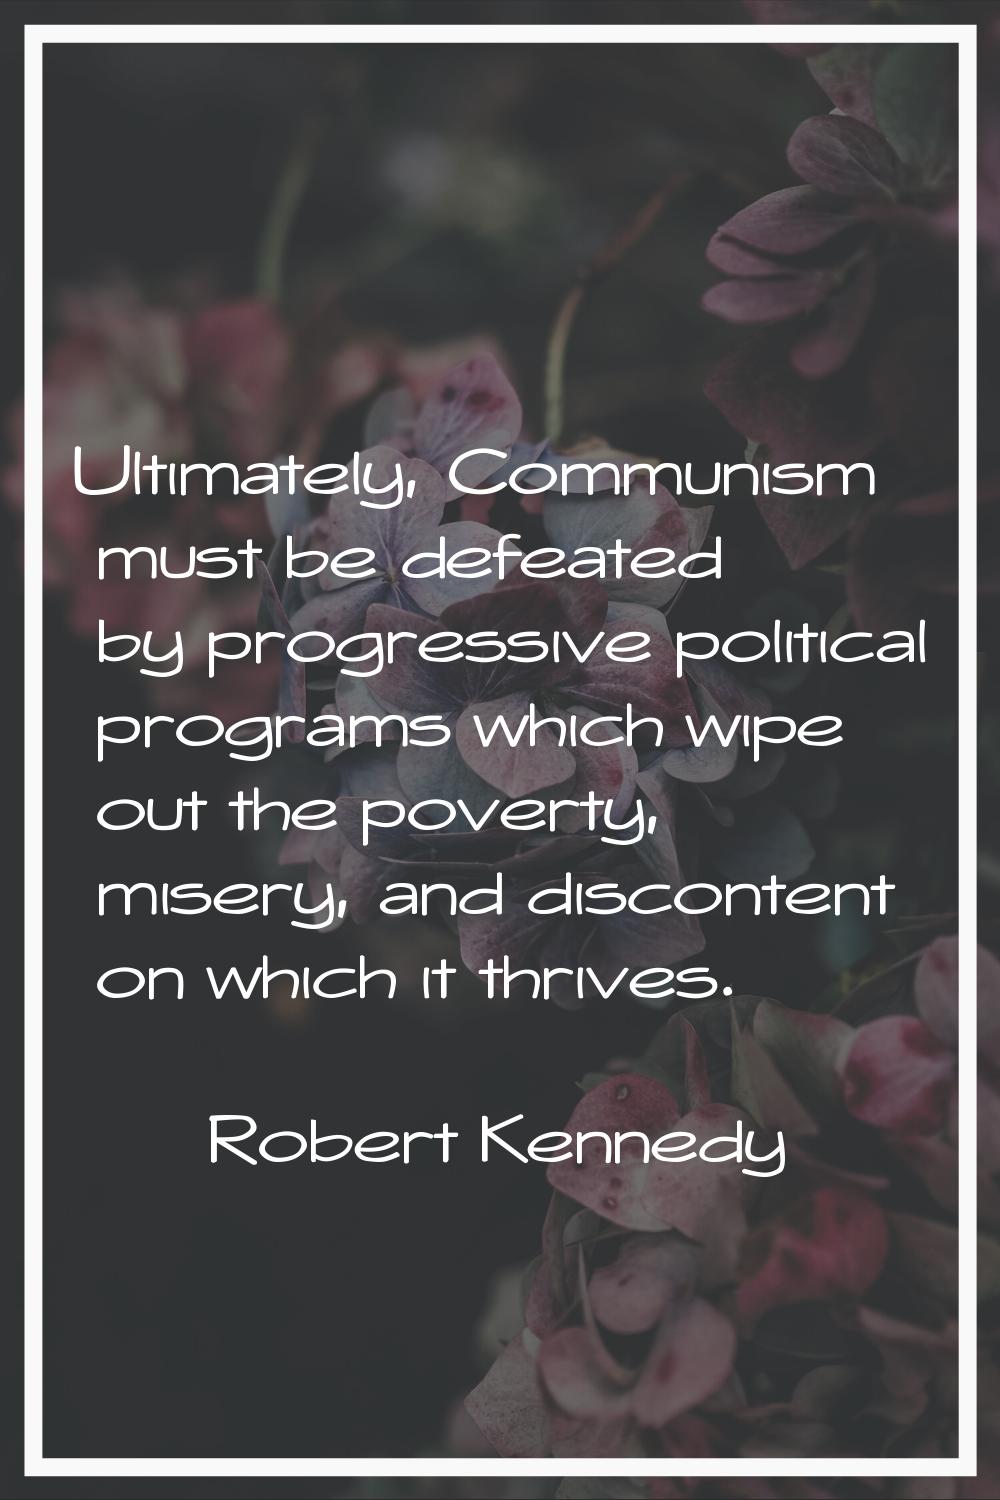 Ultimately, Communism must be defeated by progressive political programs which wipe out the poverty